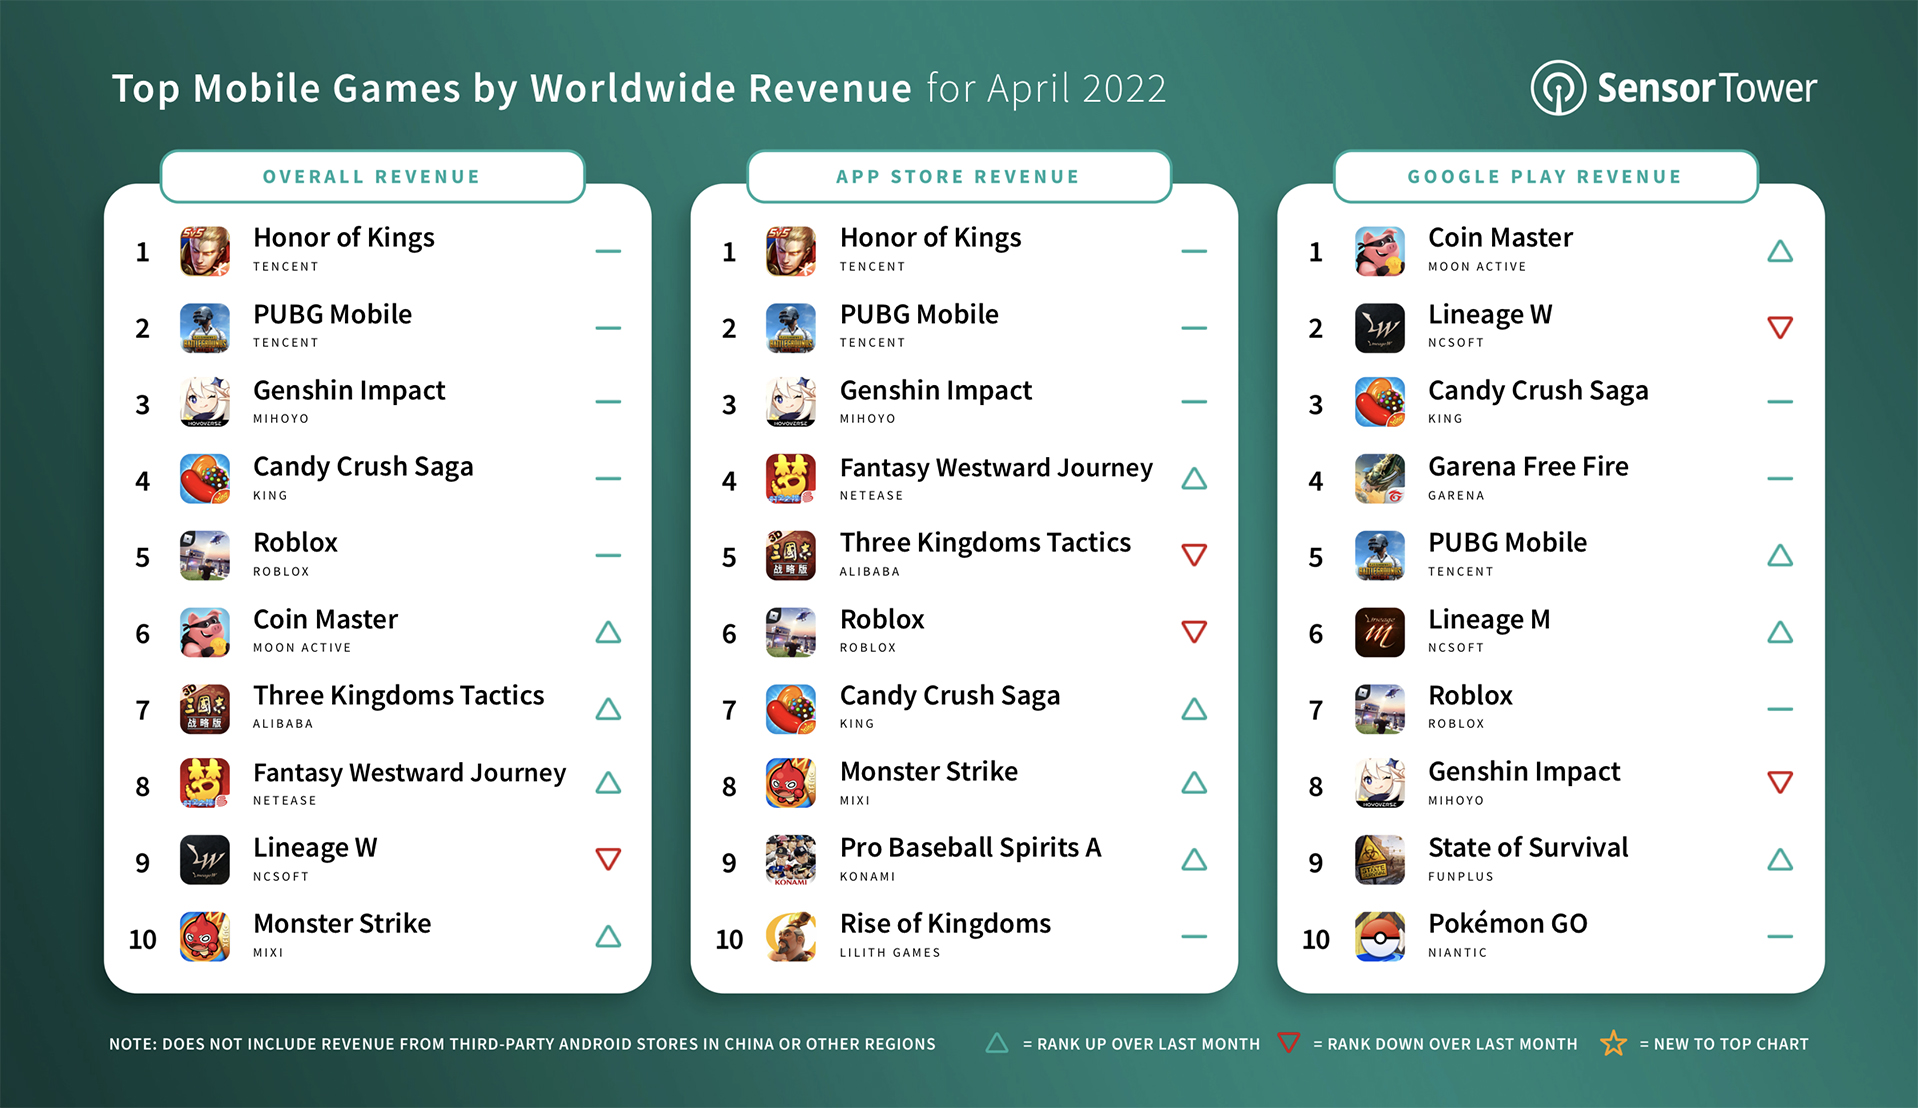 top-mobile-games-by-worldwide-revenue-april-2022